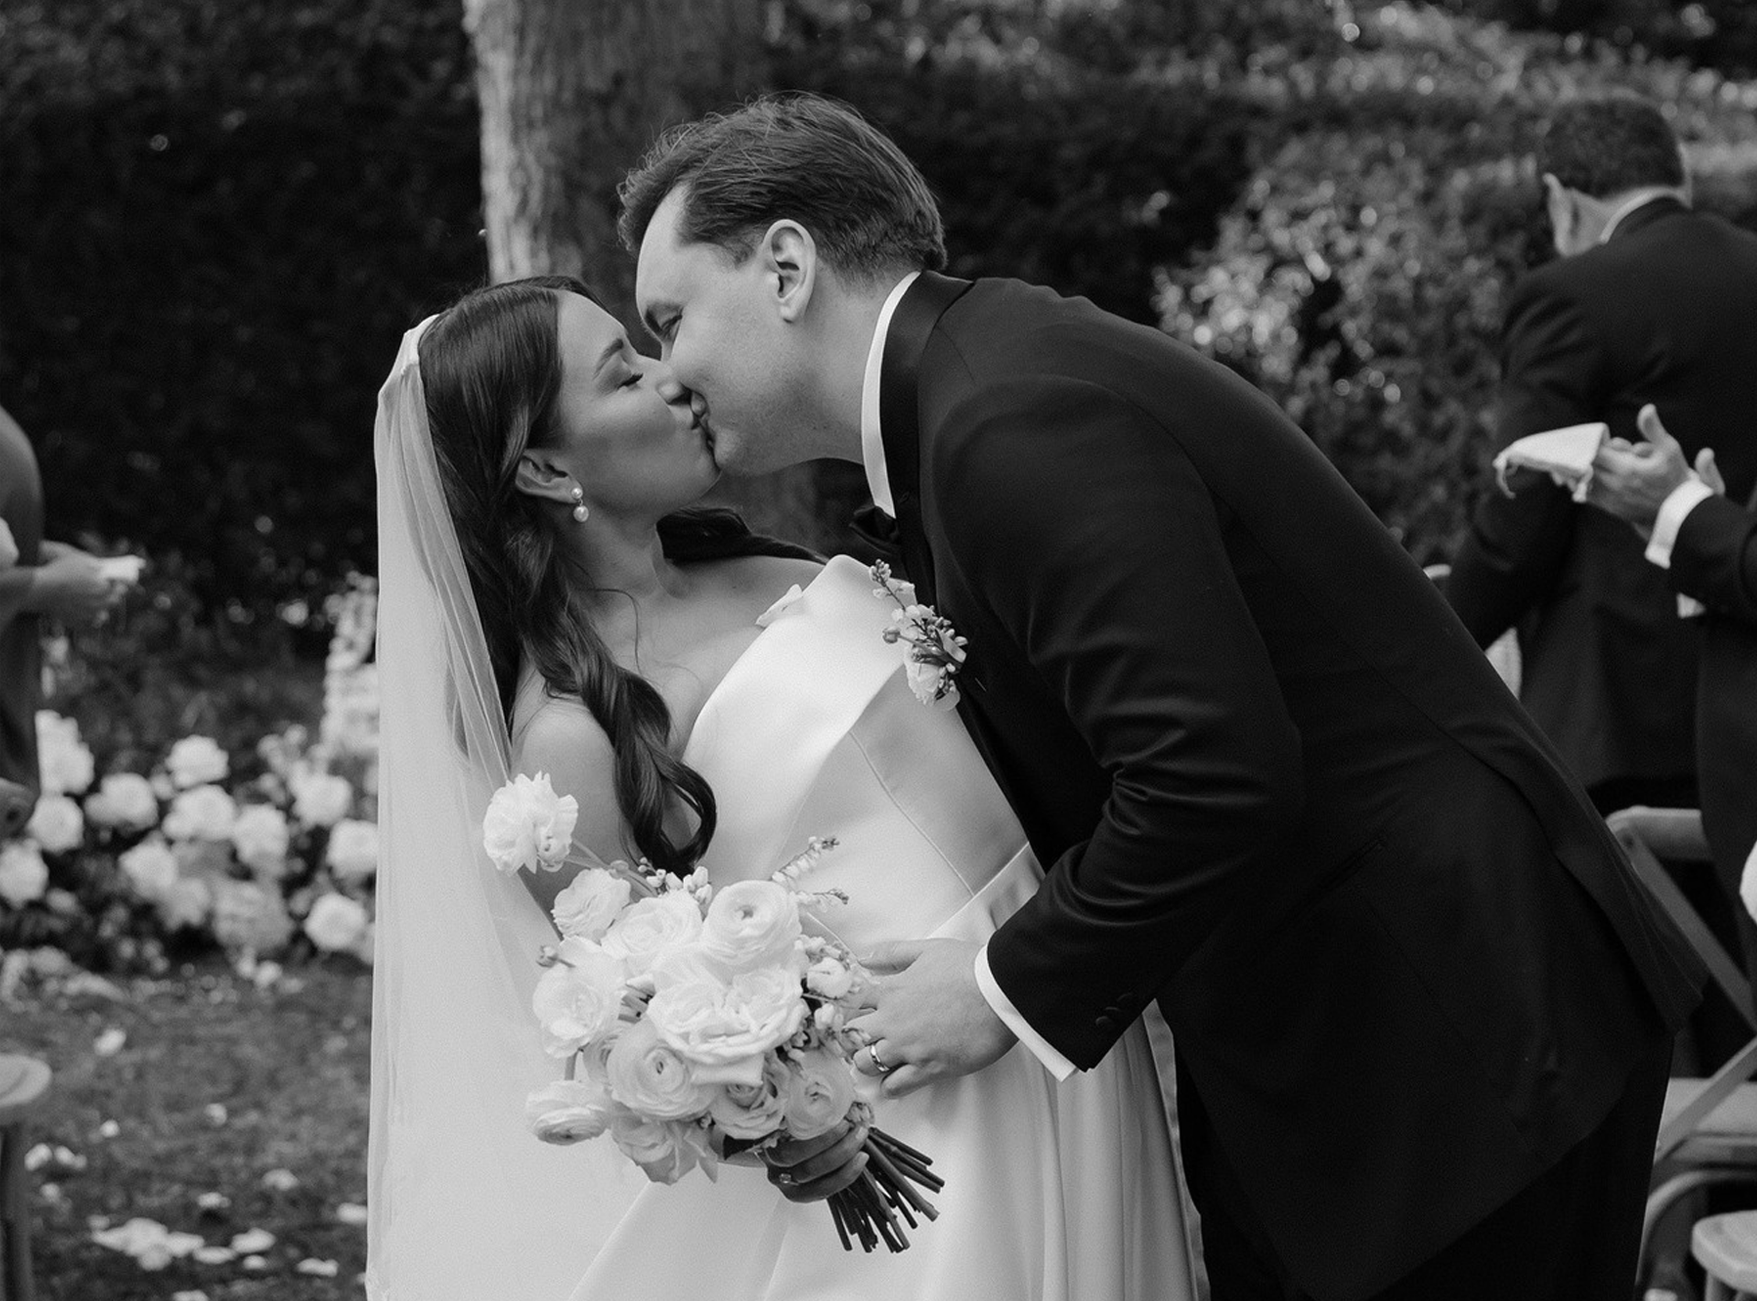 A bride and groom share a kiss outdoors during their wedding, surrounded by flowers and greenery. The bride holds a bouquet of white roses and wears a veil, while the groom is in a dark suit. The scene is intimate and romantic.